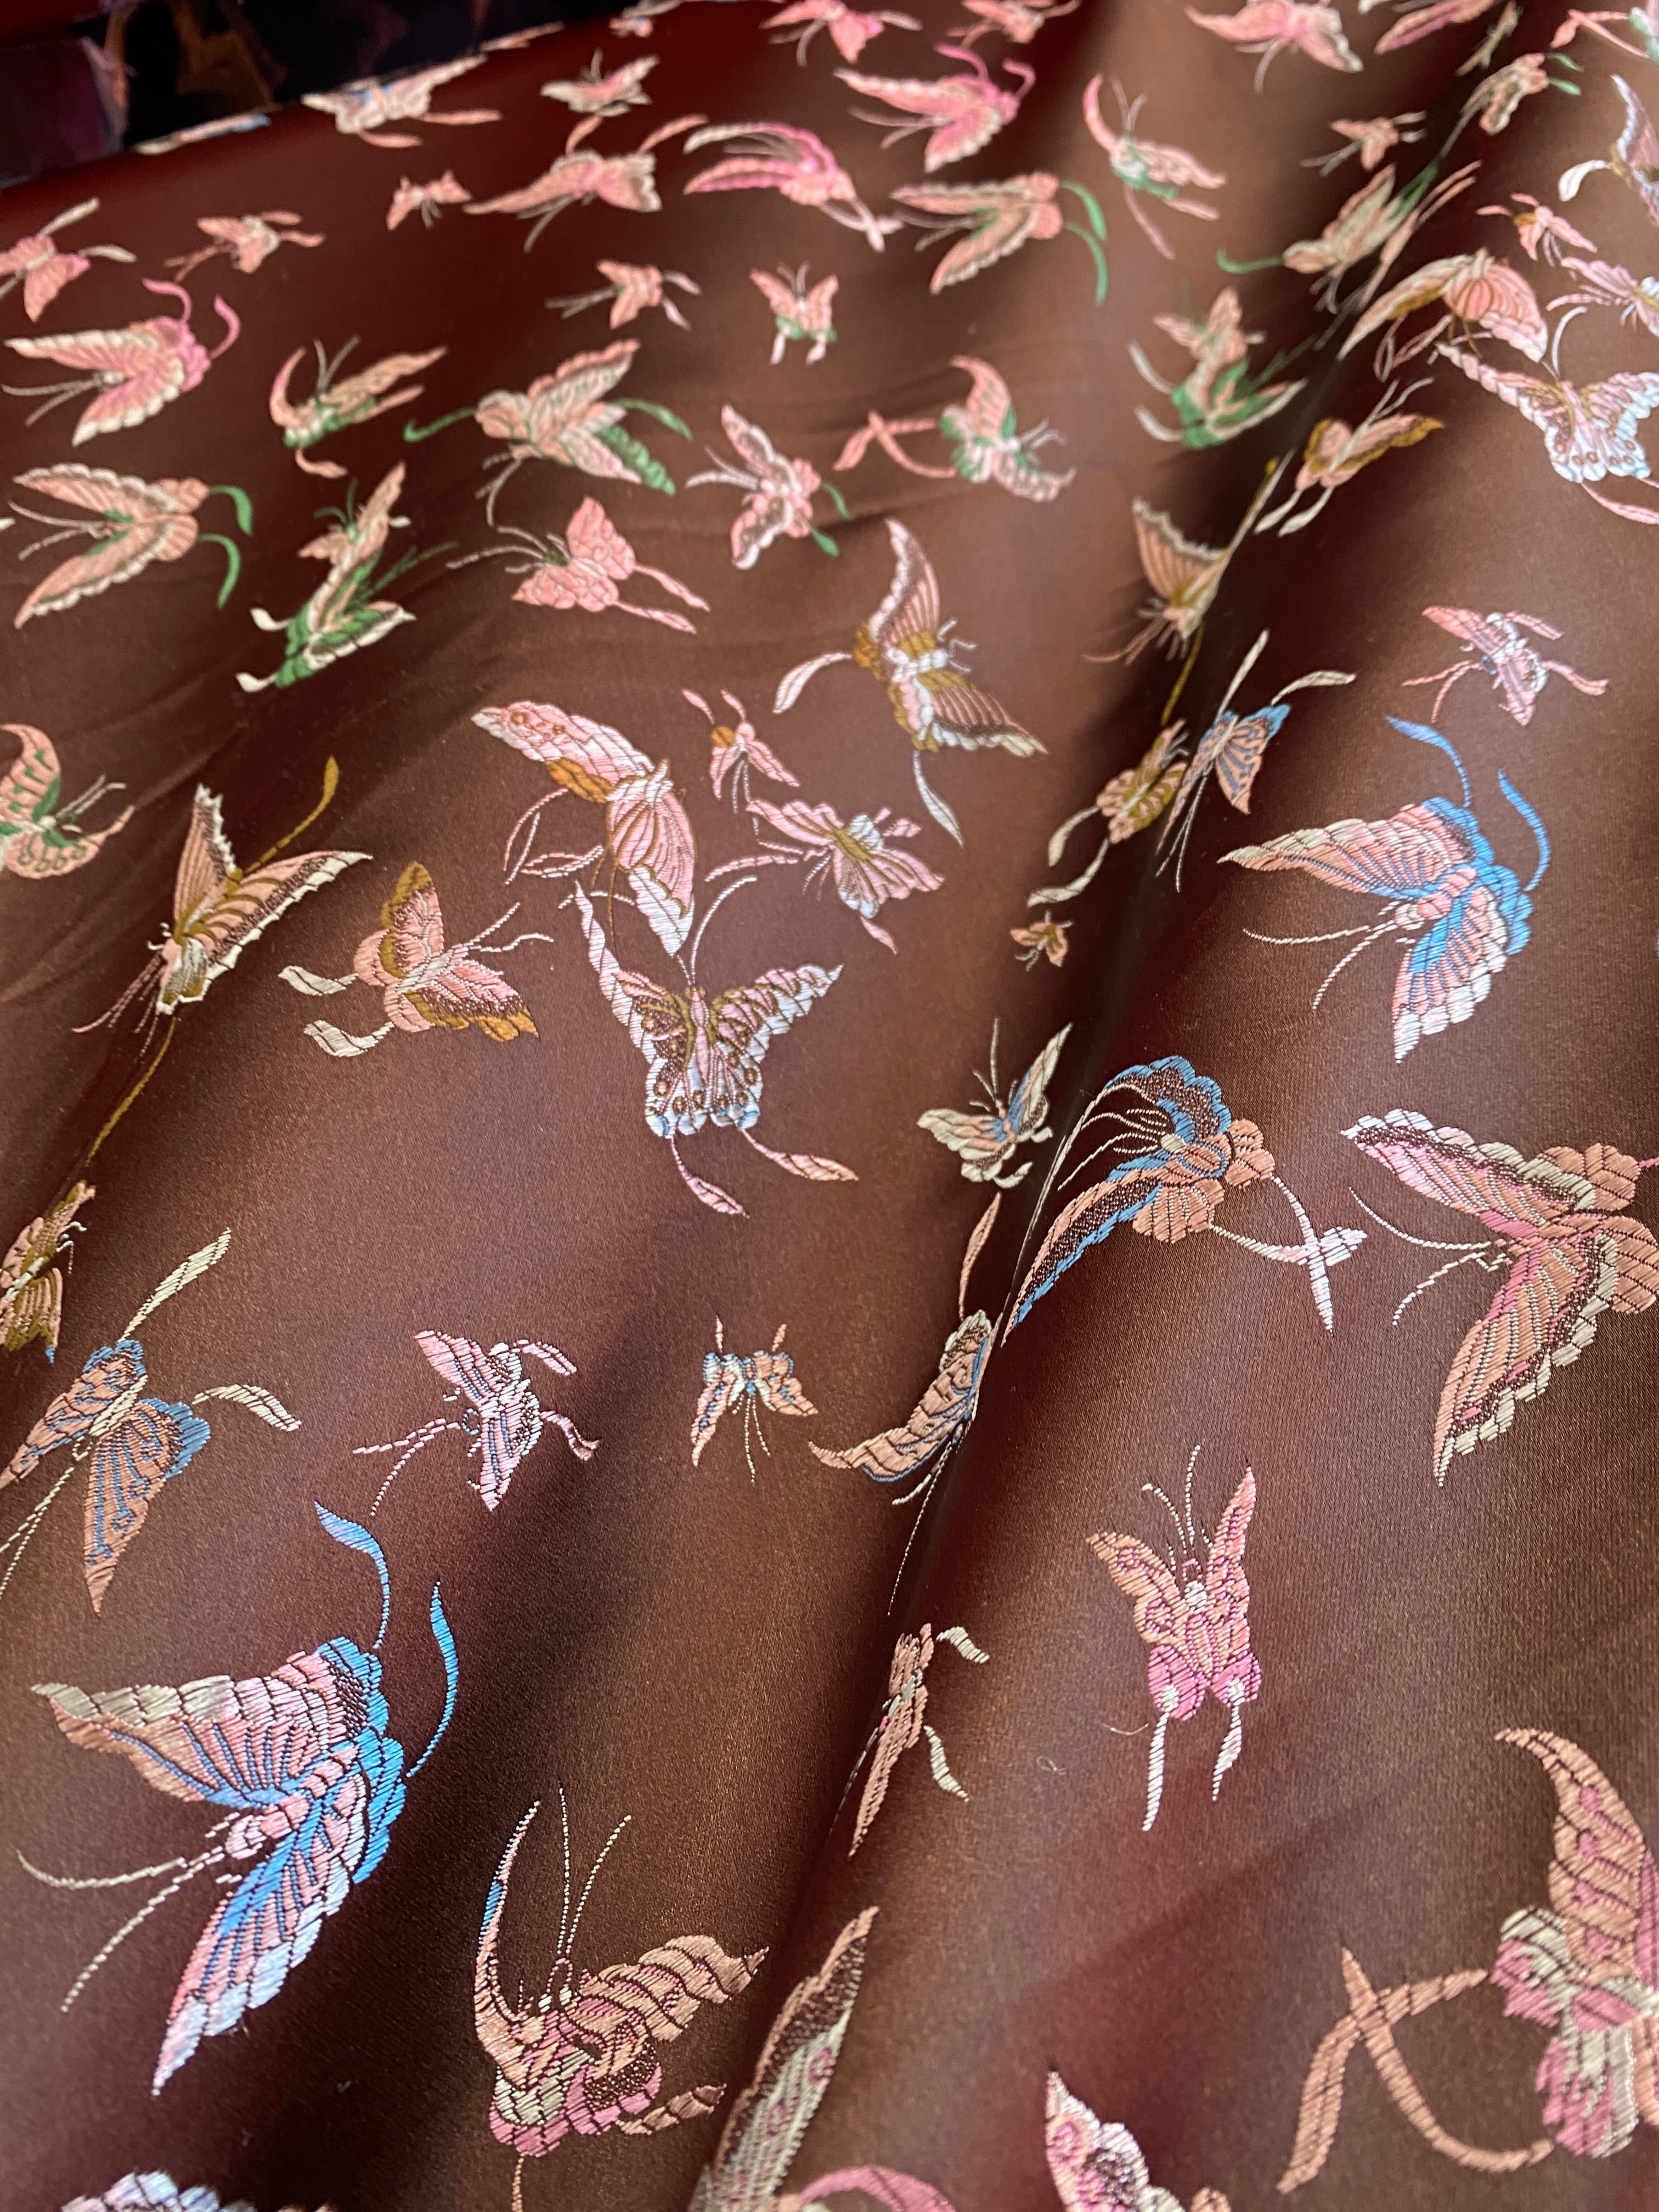 Brown Embroidered Butterfly Brocade, Brown butterfly print brocade Fabric, Brown Jacquard, Brown Satin Brocade with Butterflies, Brown Embroidered Butterfly Brocade fro women, Brown Embroidered Butterfly Brocade for dress, Embroidered Butterfly Brocade for homedecor, Brown Embroidered Butterfly Brocade on discount, brocade on sale 